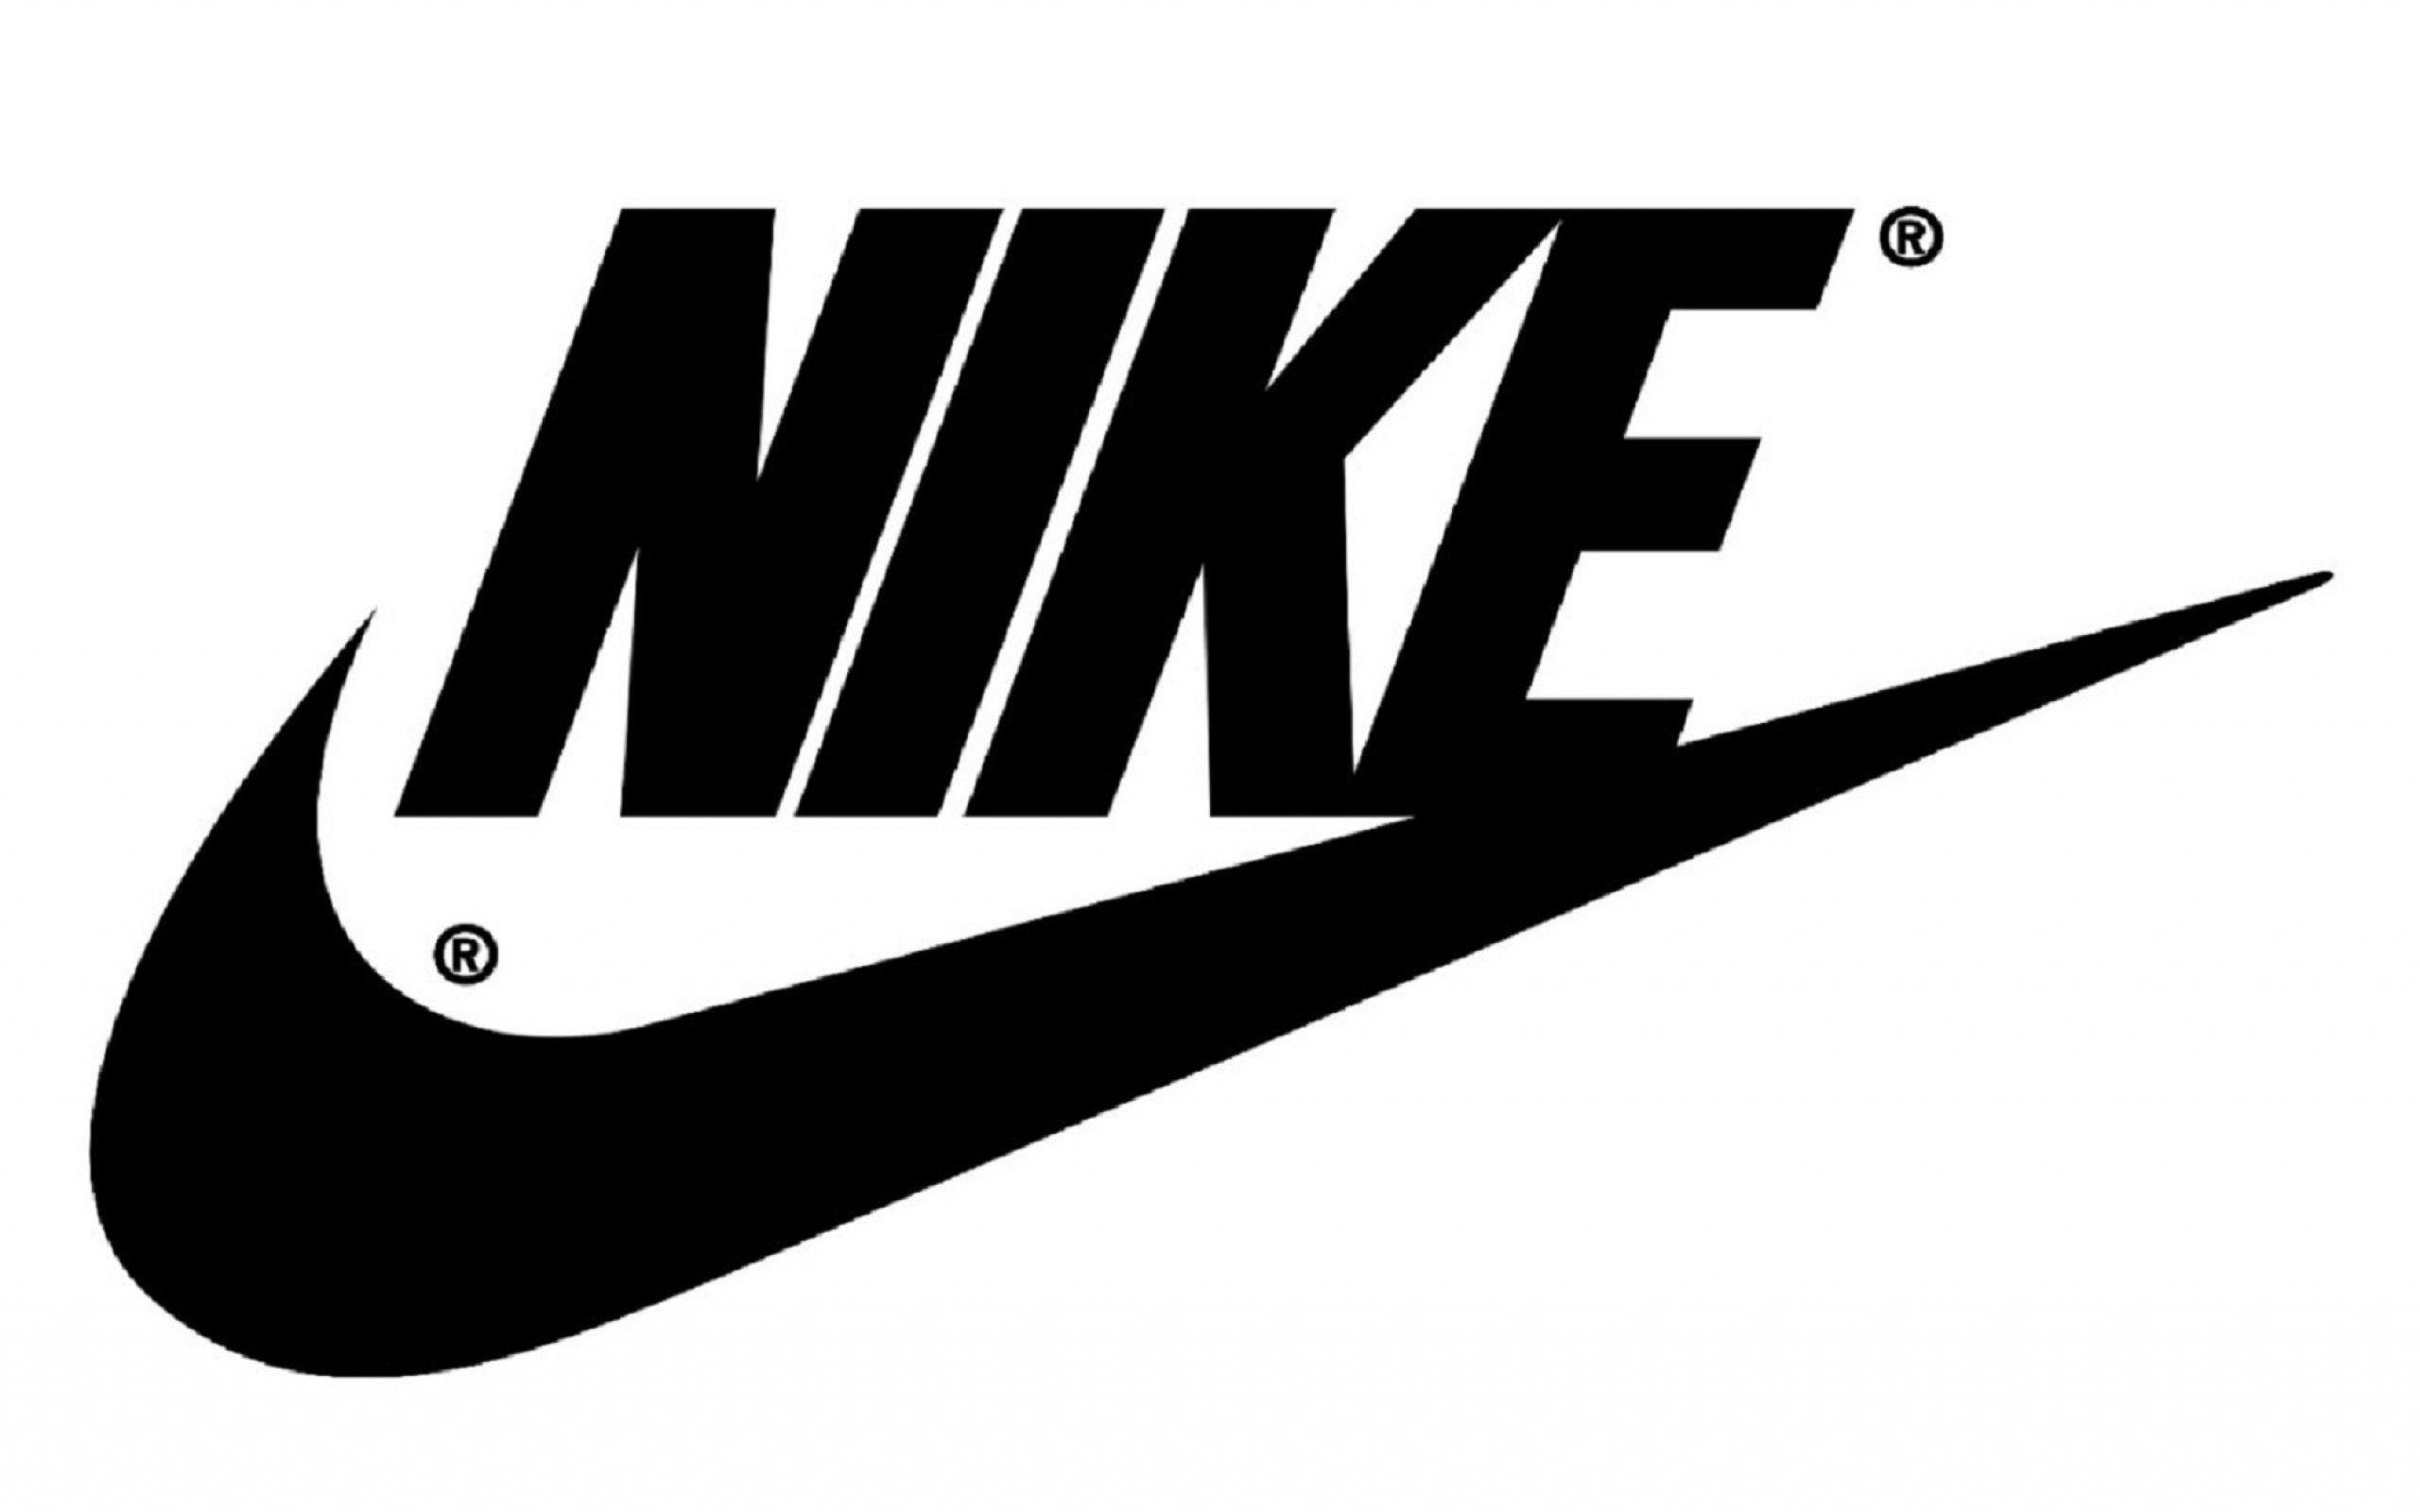 Black and White Nike Logo - Precise Continental The Story of the Designer who made Nike's Swoosh